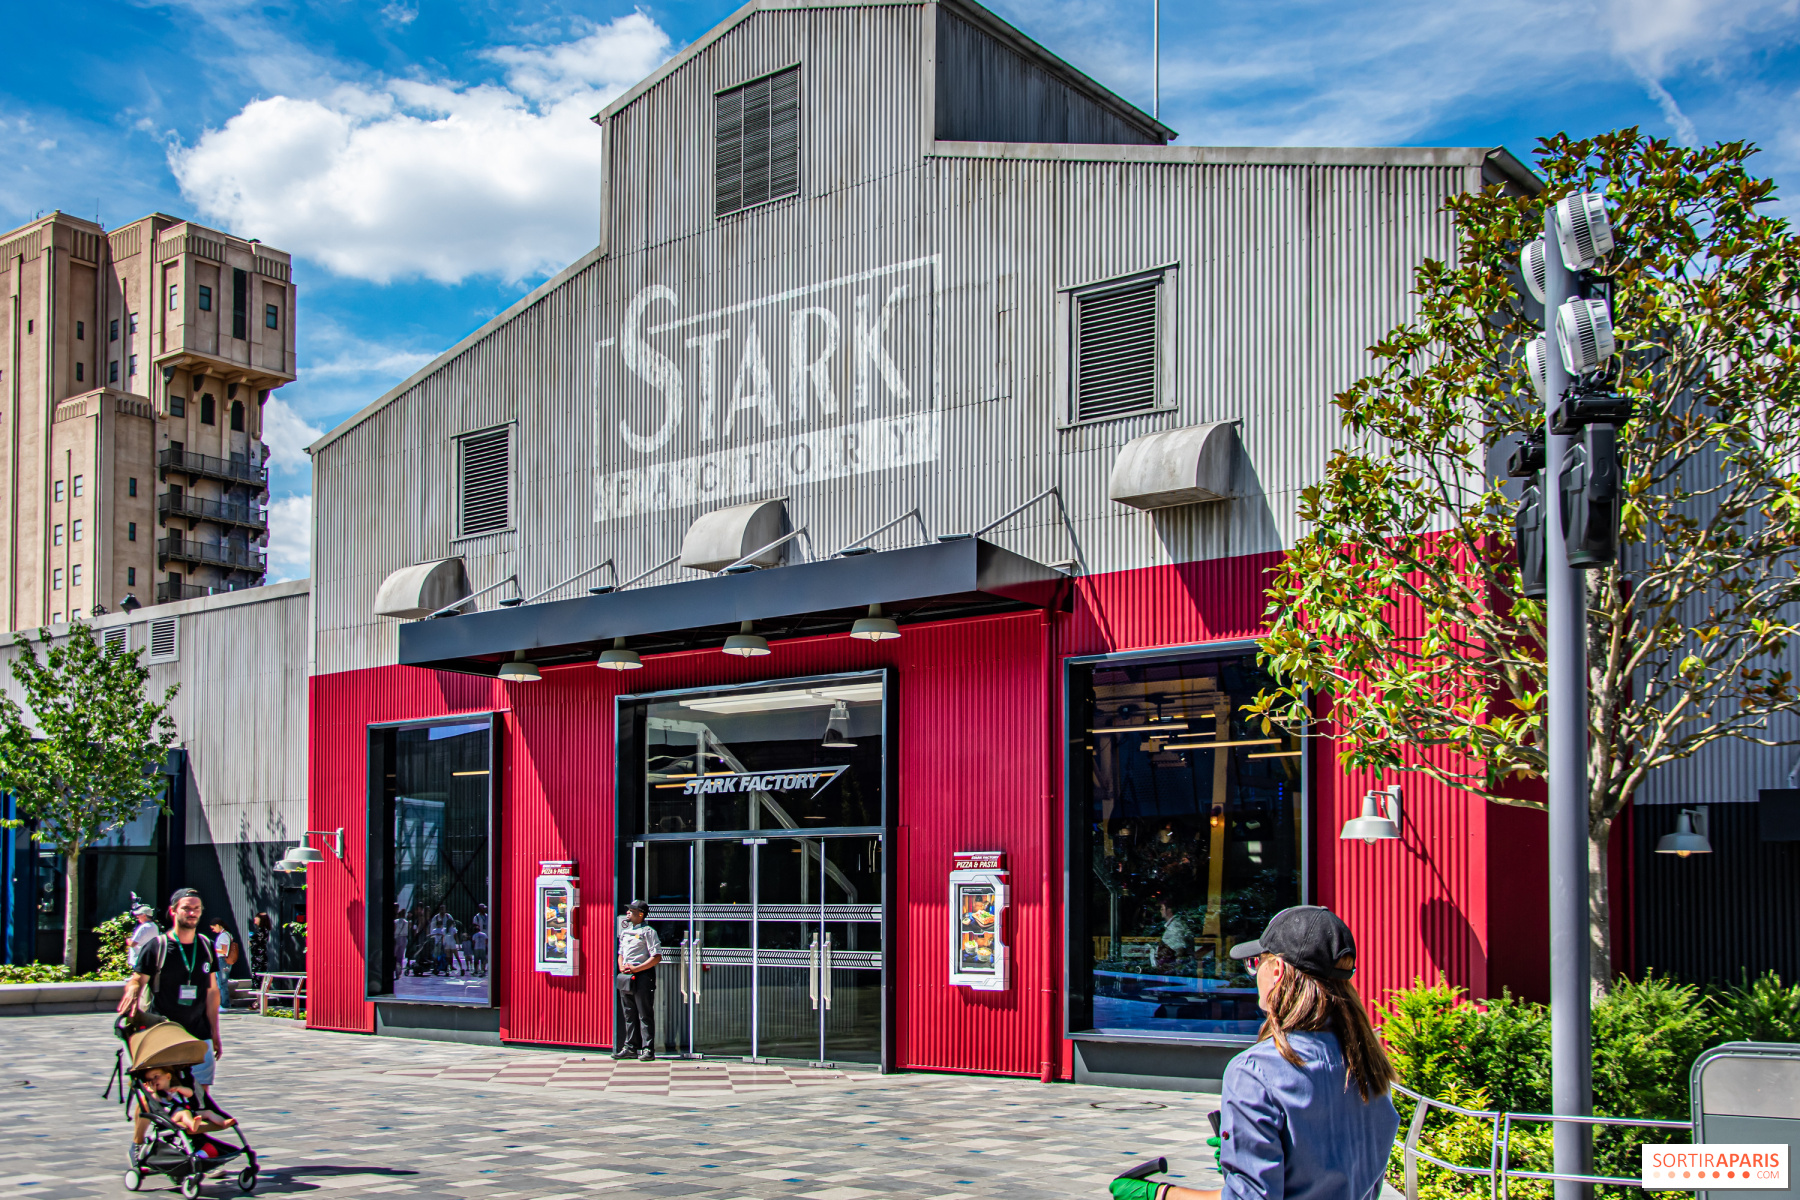 Disneyland - Avengers Campus : Stark Factory, our pictures of the